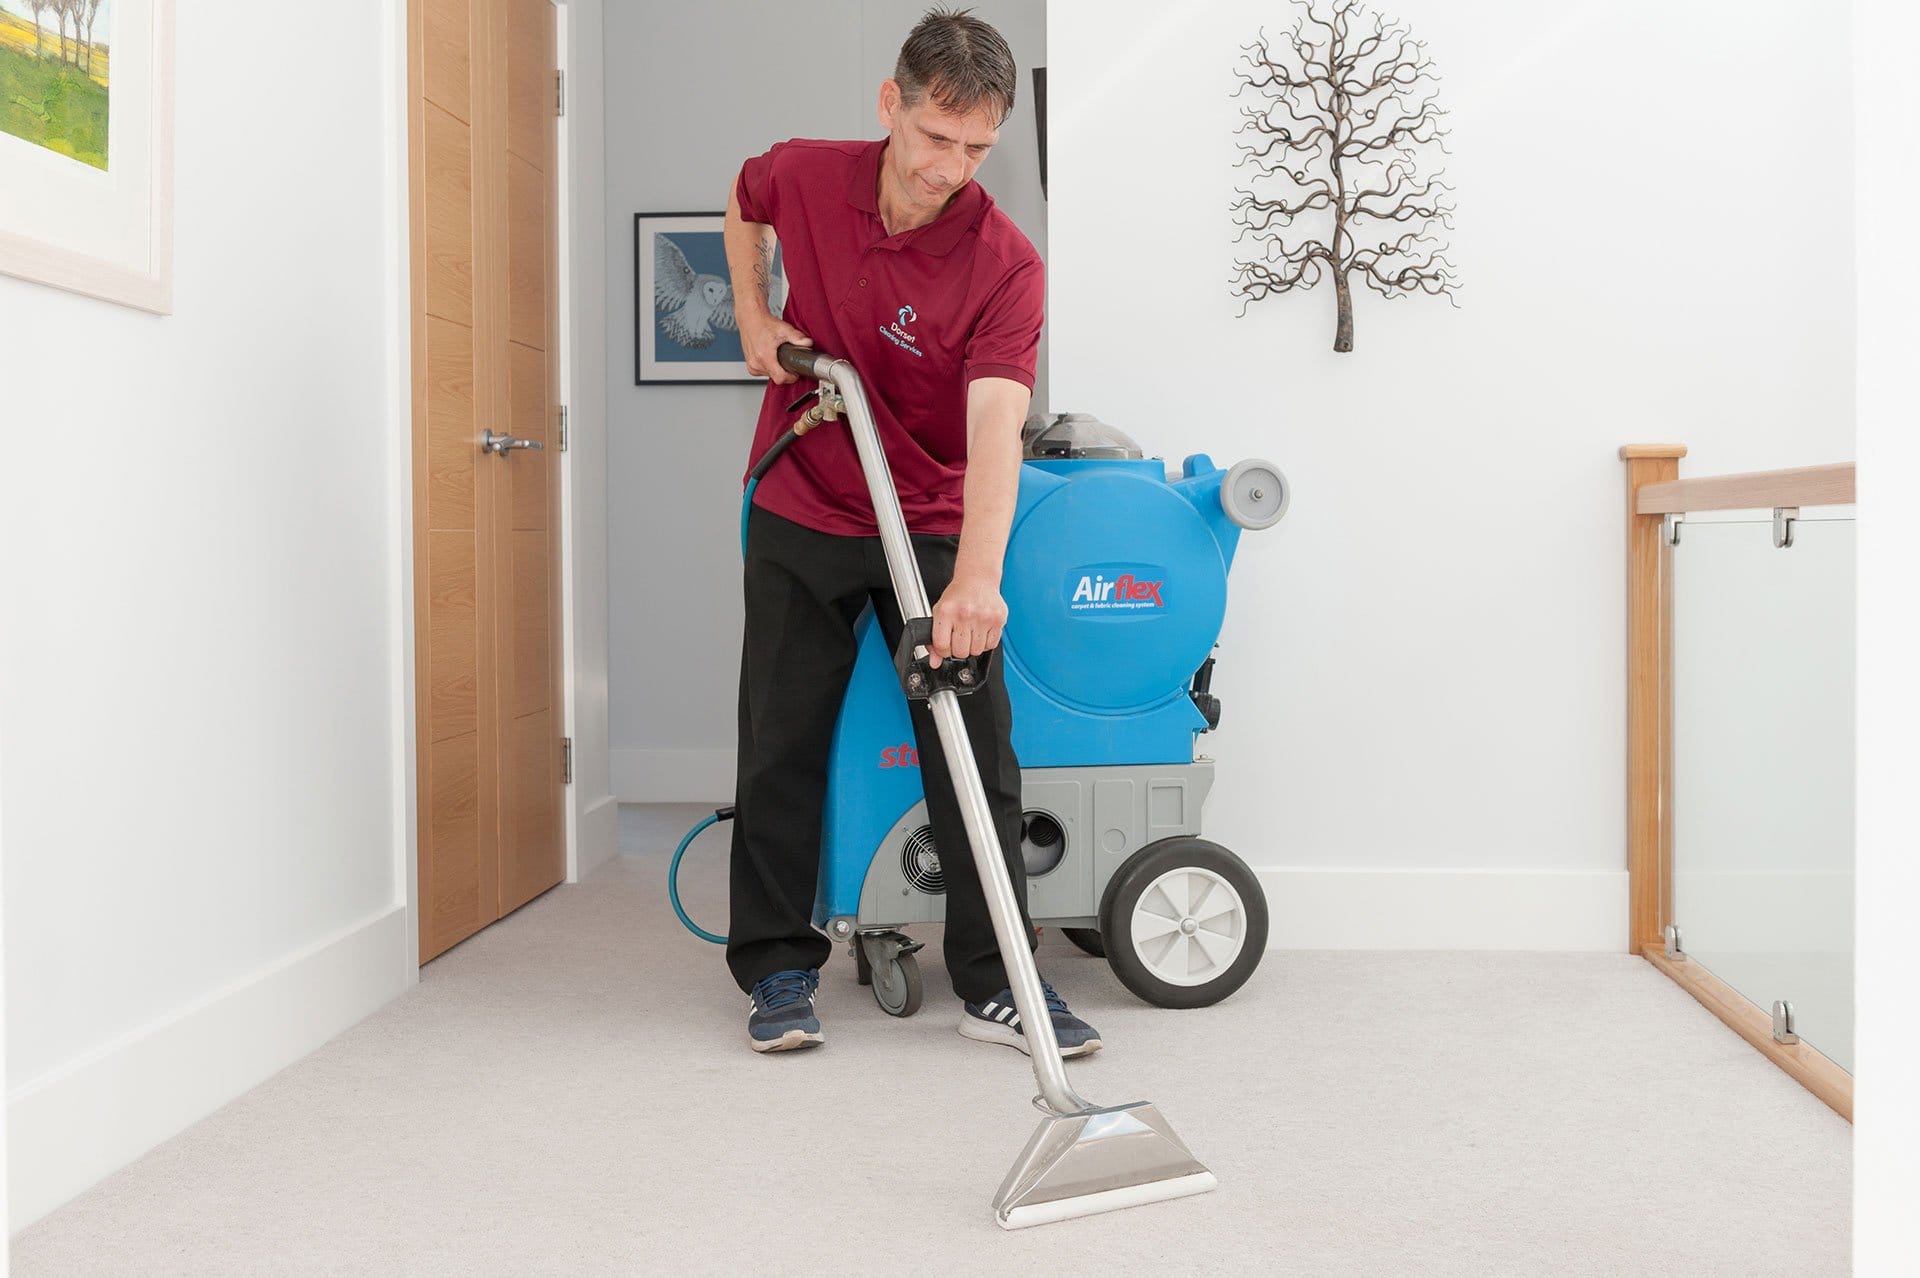 Dorset Cleaning Services LTD - Weymouth, UK, carpet cleaner